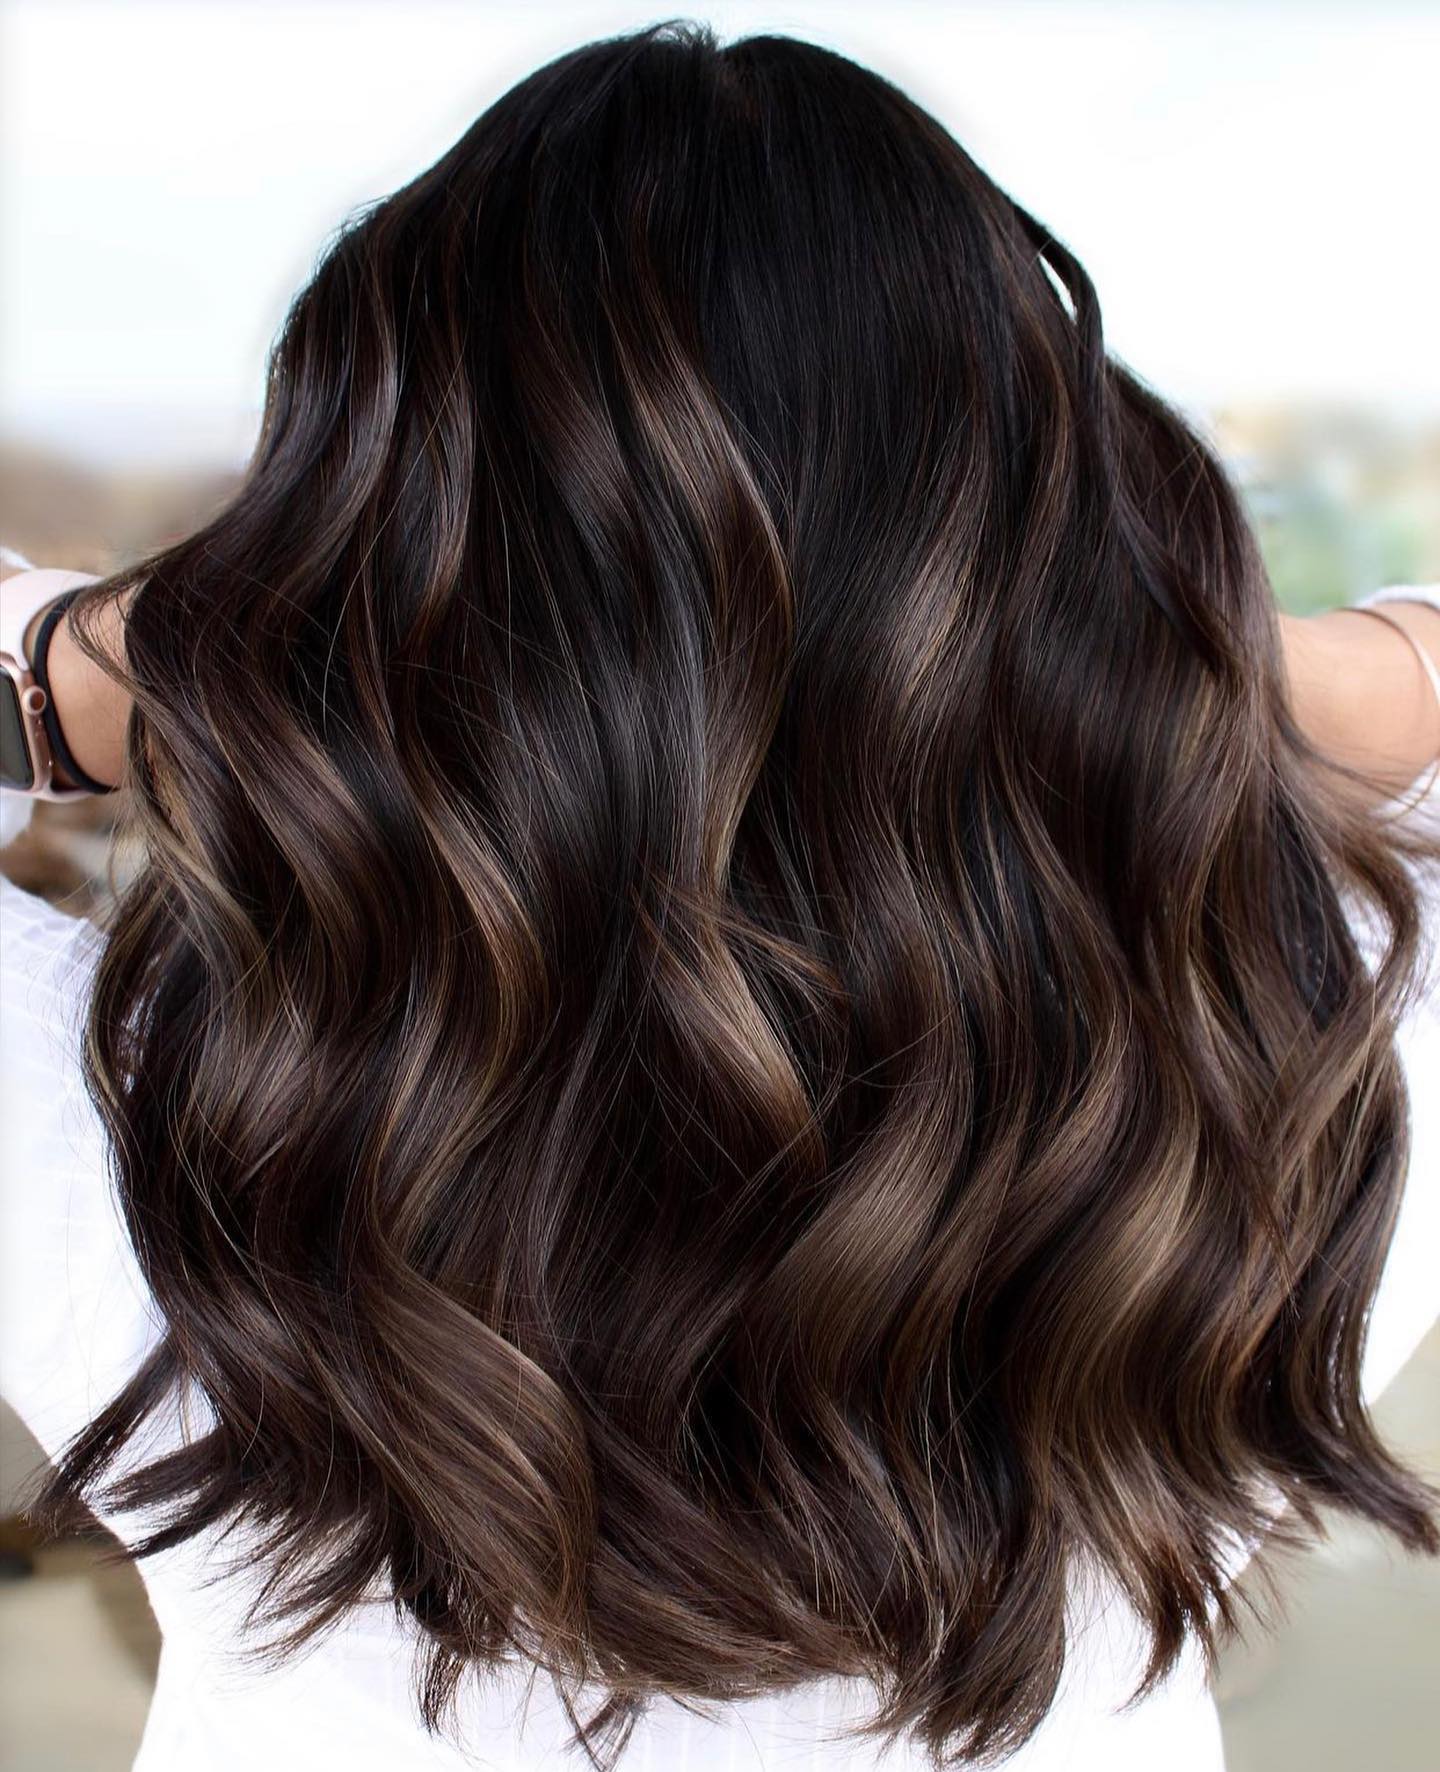 21 Outstanding Hair Color Ideas to Inspire You in 2023 - Hairstyle